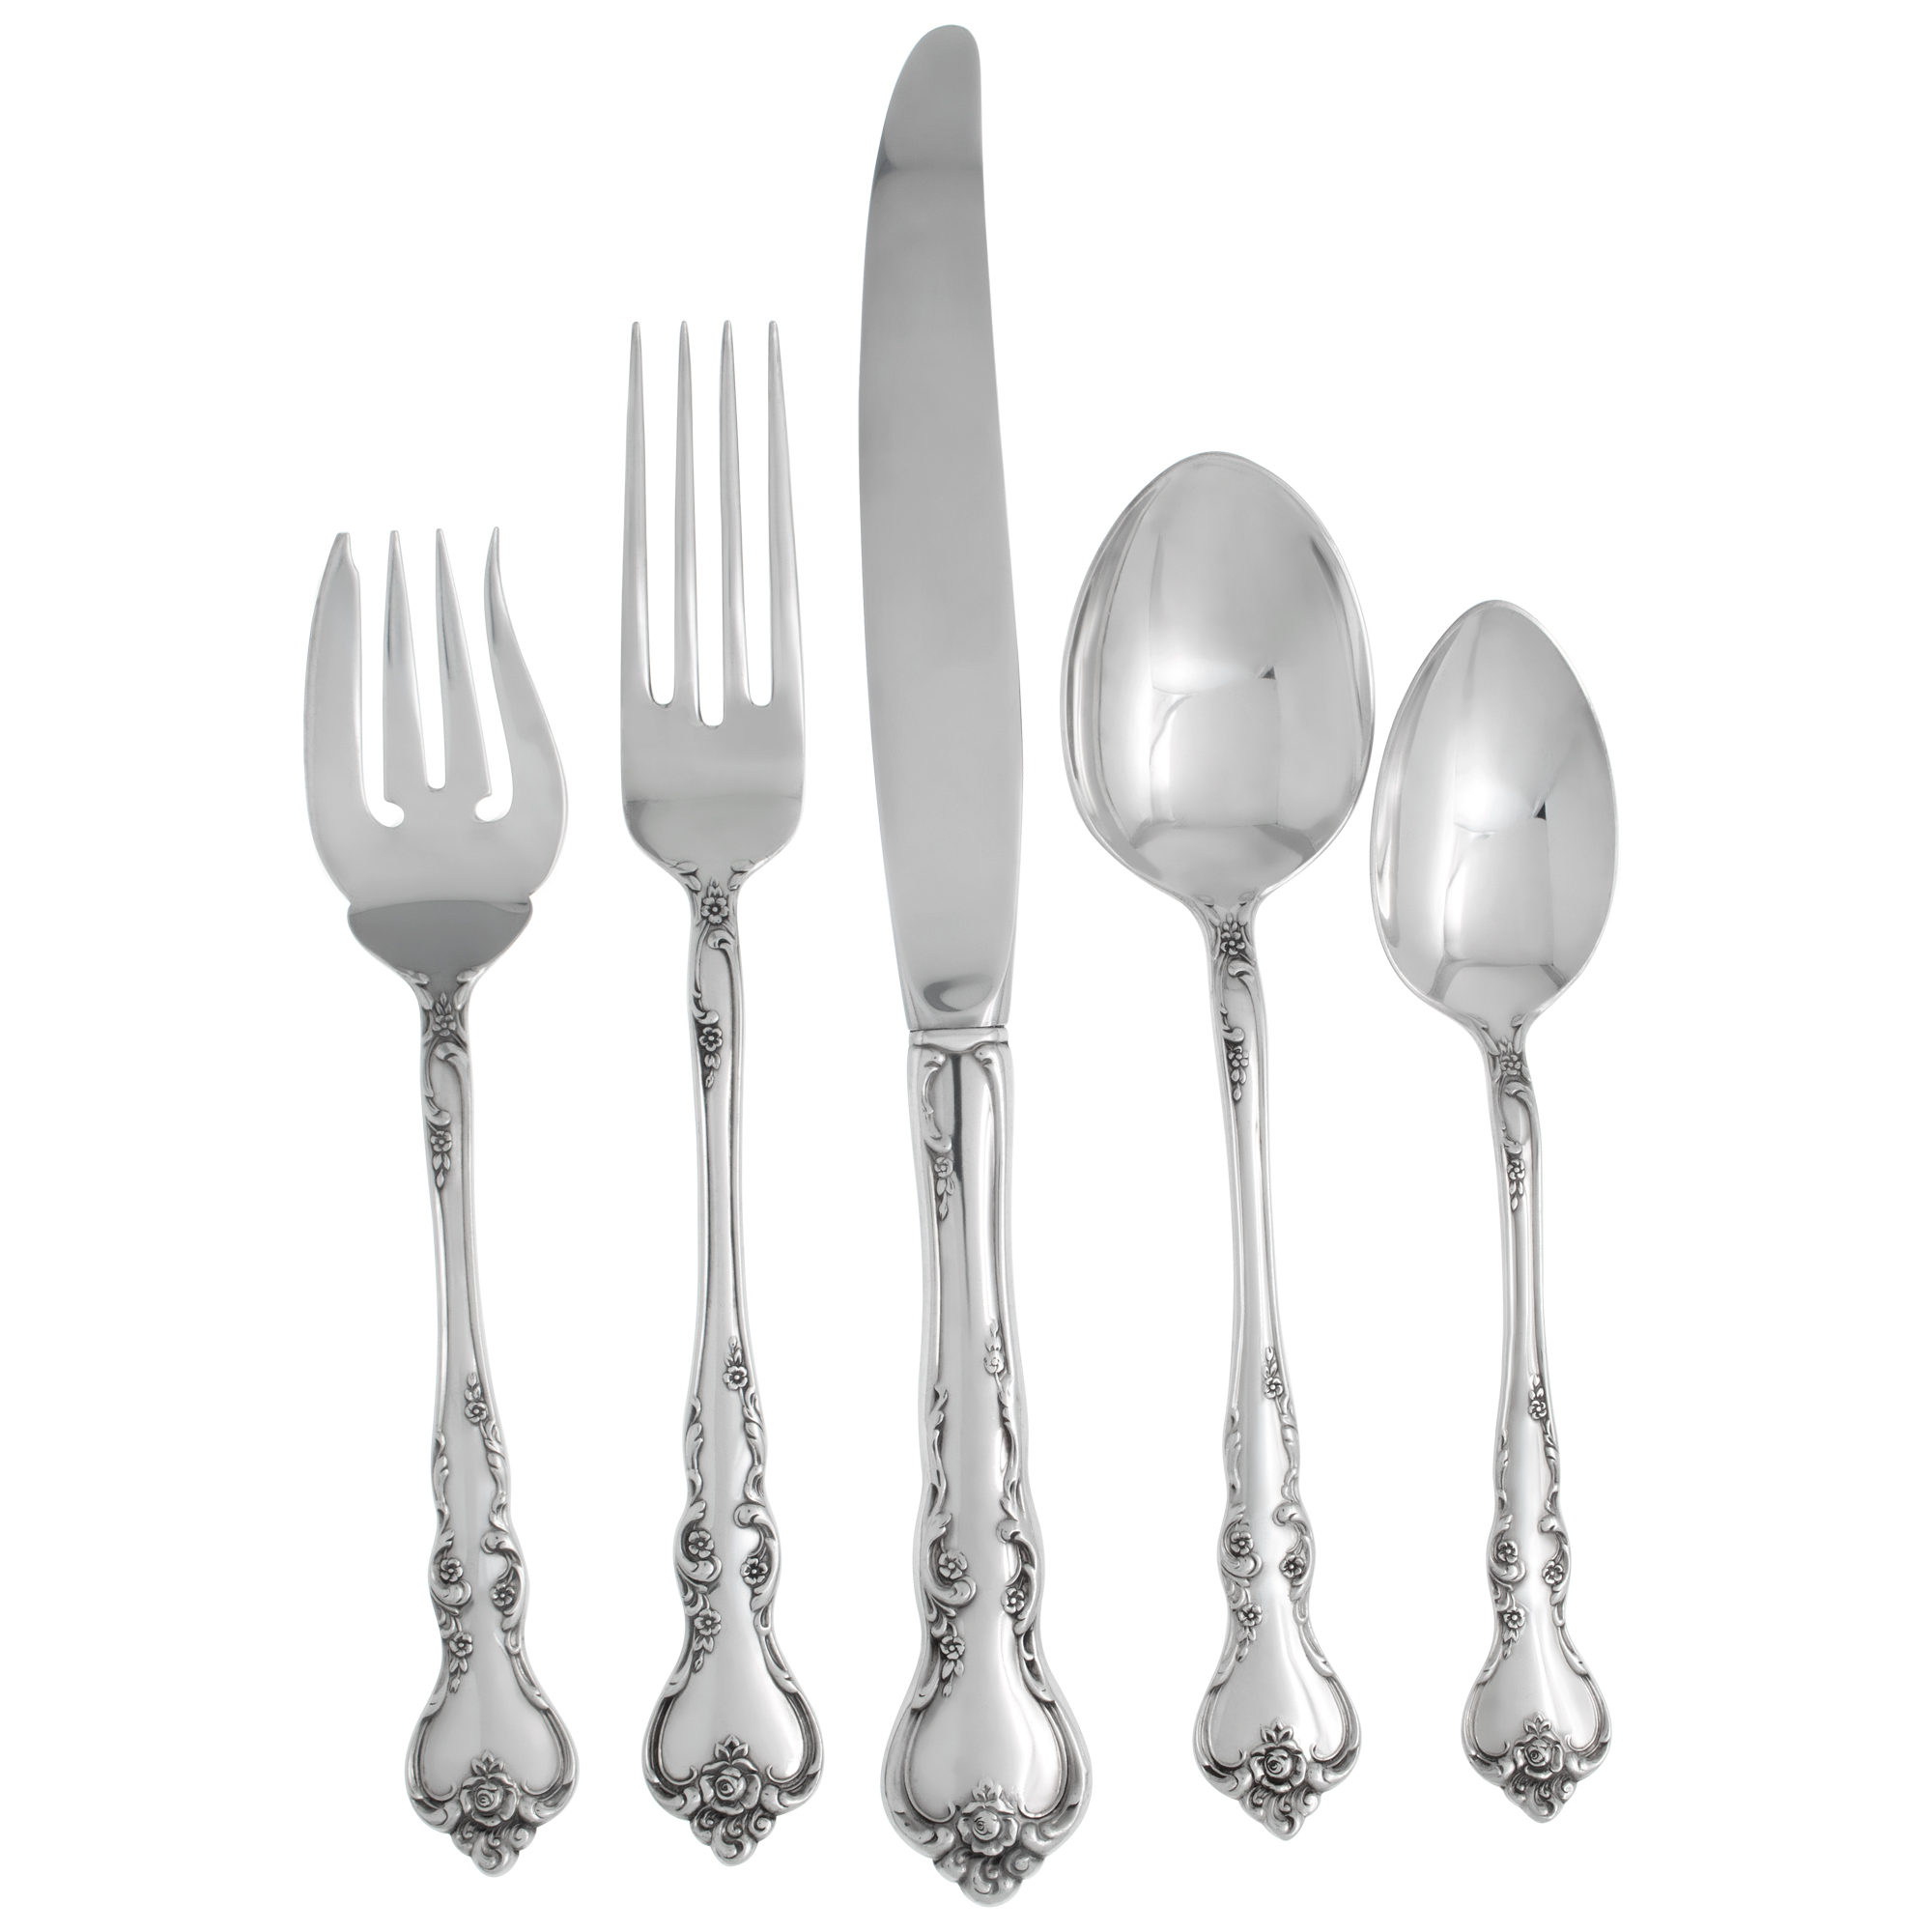 SAVANNAH sterling flatware set patented in 1962 by Reed & Barton. 5 Place setting for 12 + 3 serving pieces.